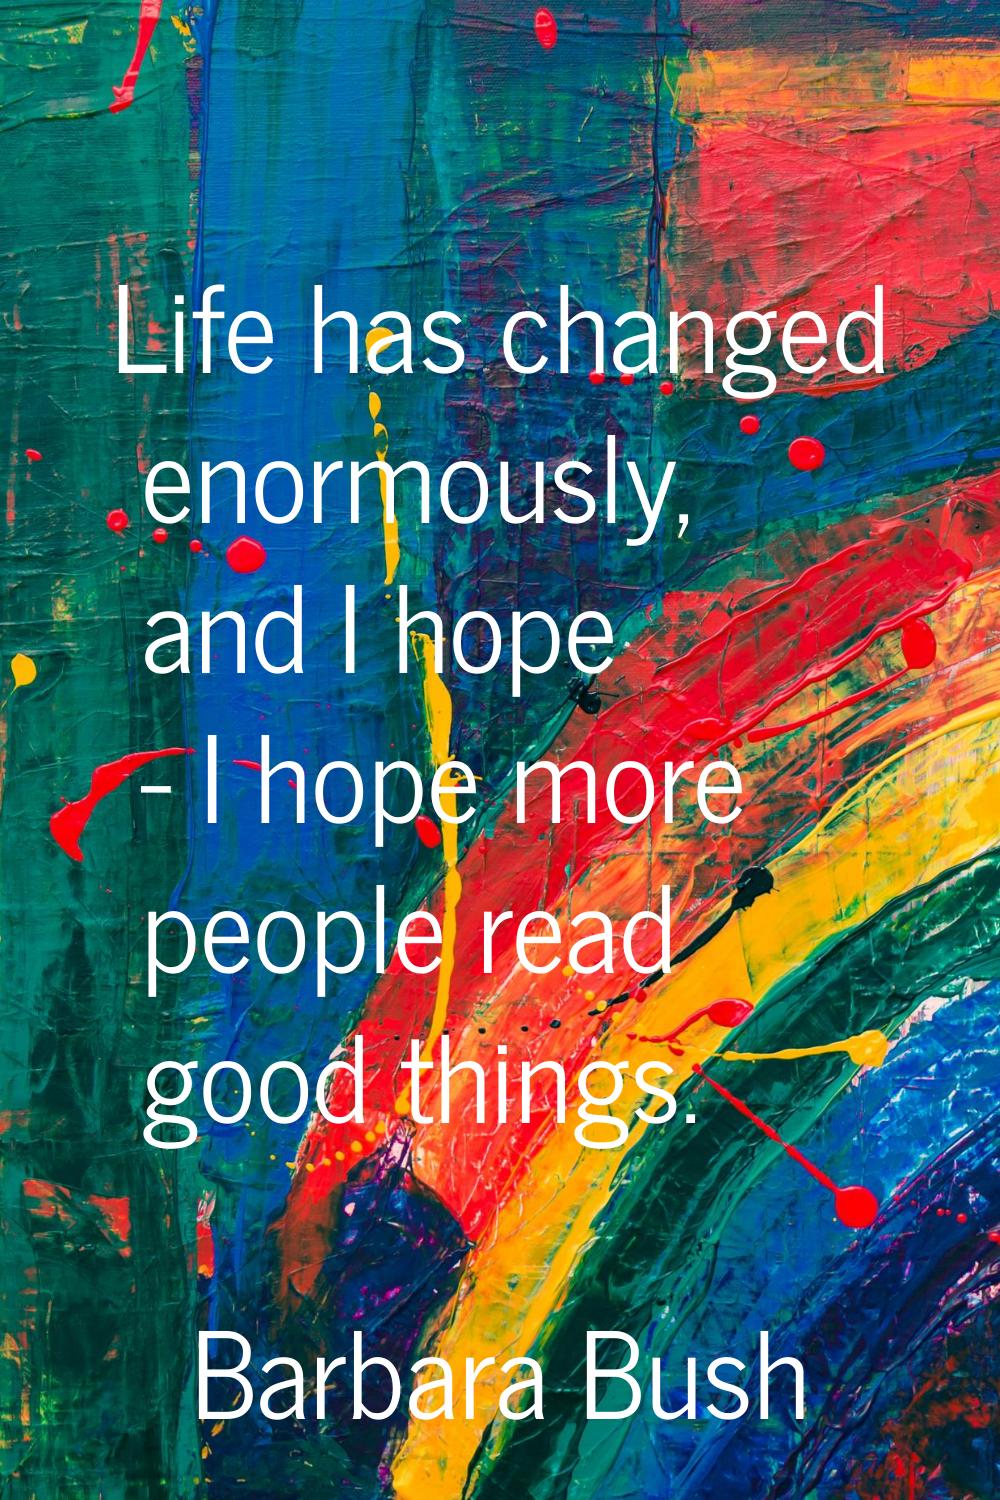 Life has changed enormously, and I hope - I hope more people read good things.